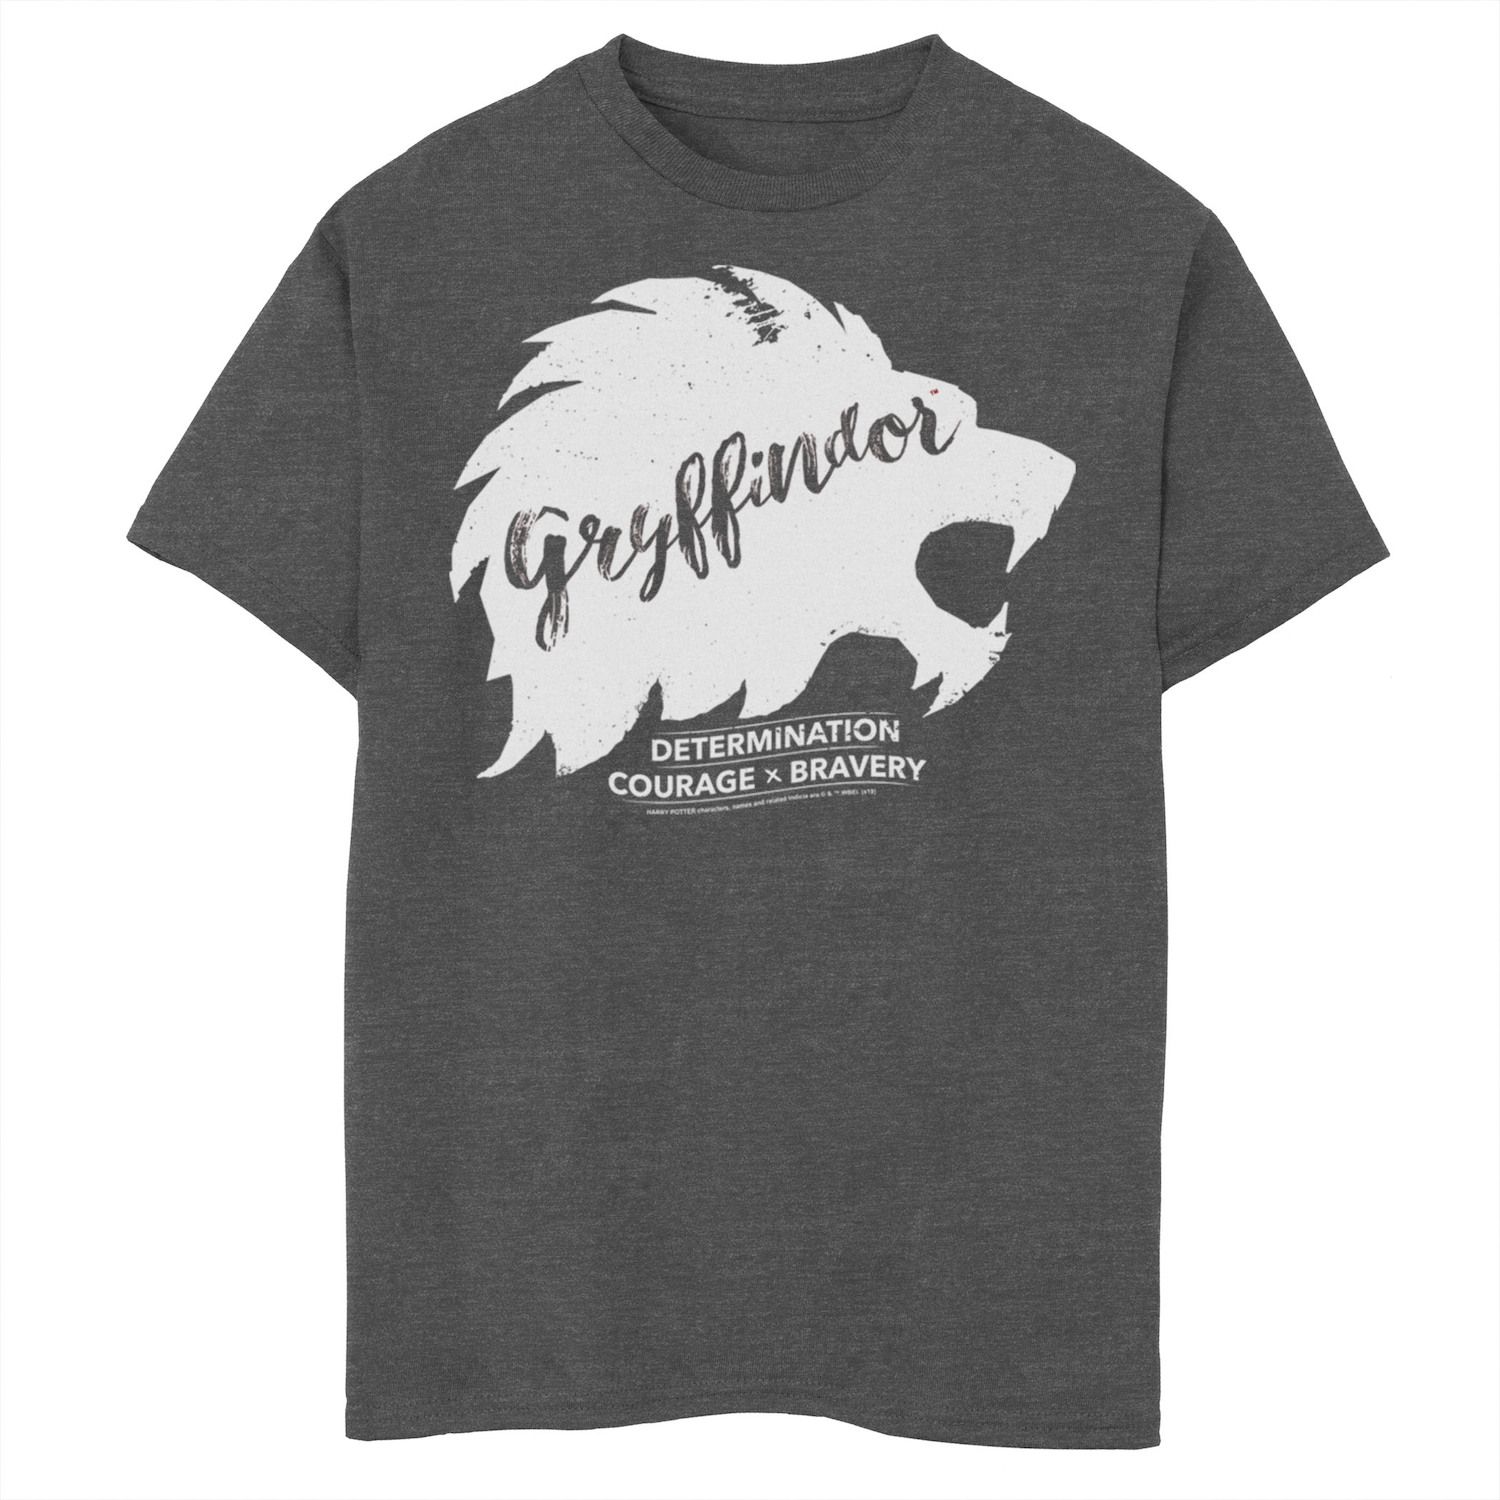 Image for Harry Potter Boys 8-20 Gryffindor "Determination" Graphic Tee at Kohl's.